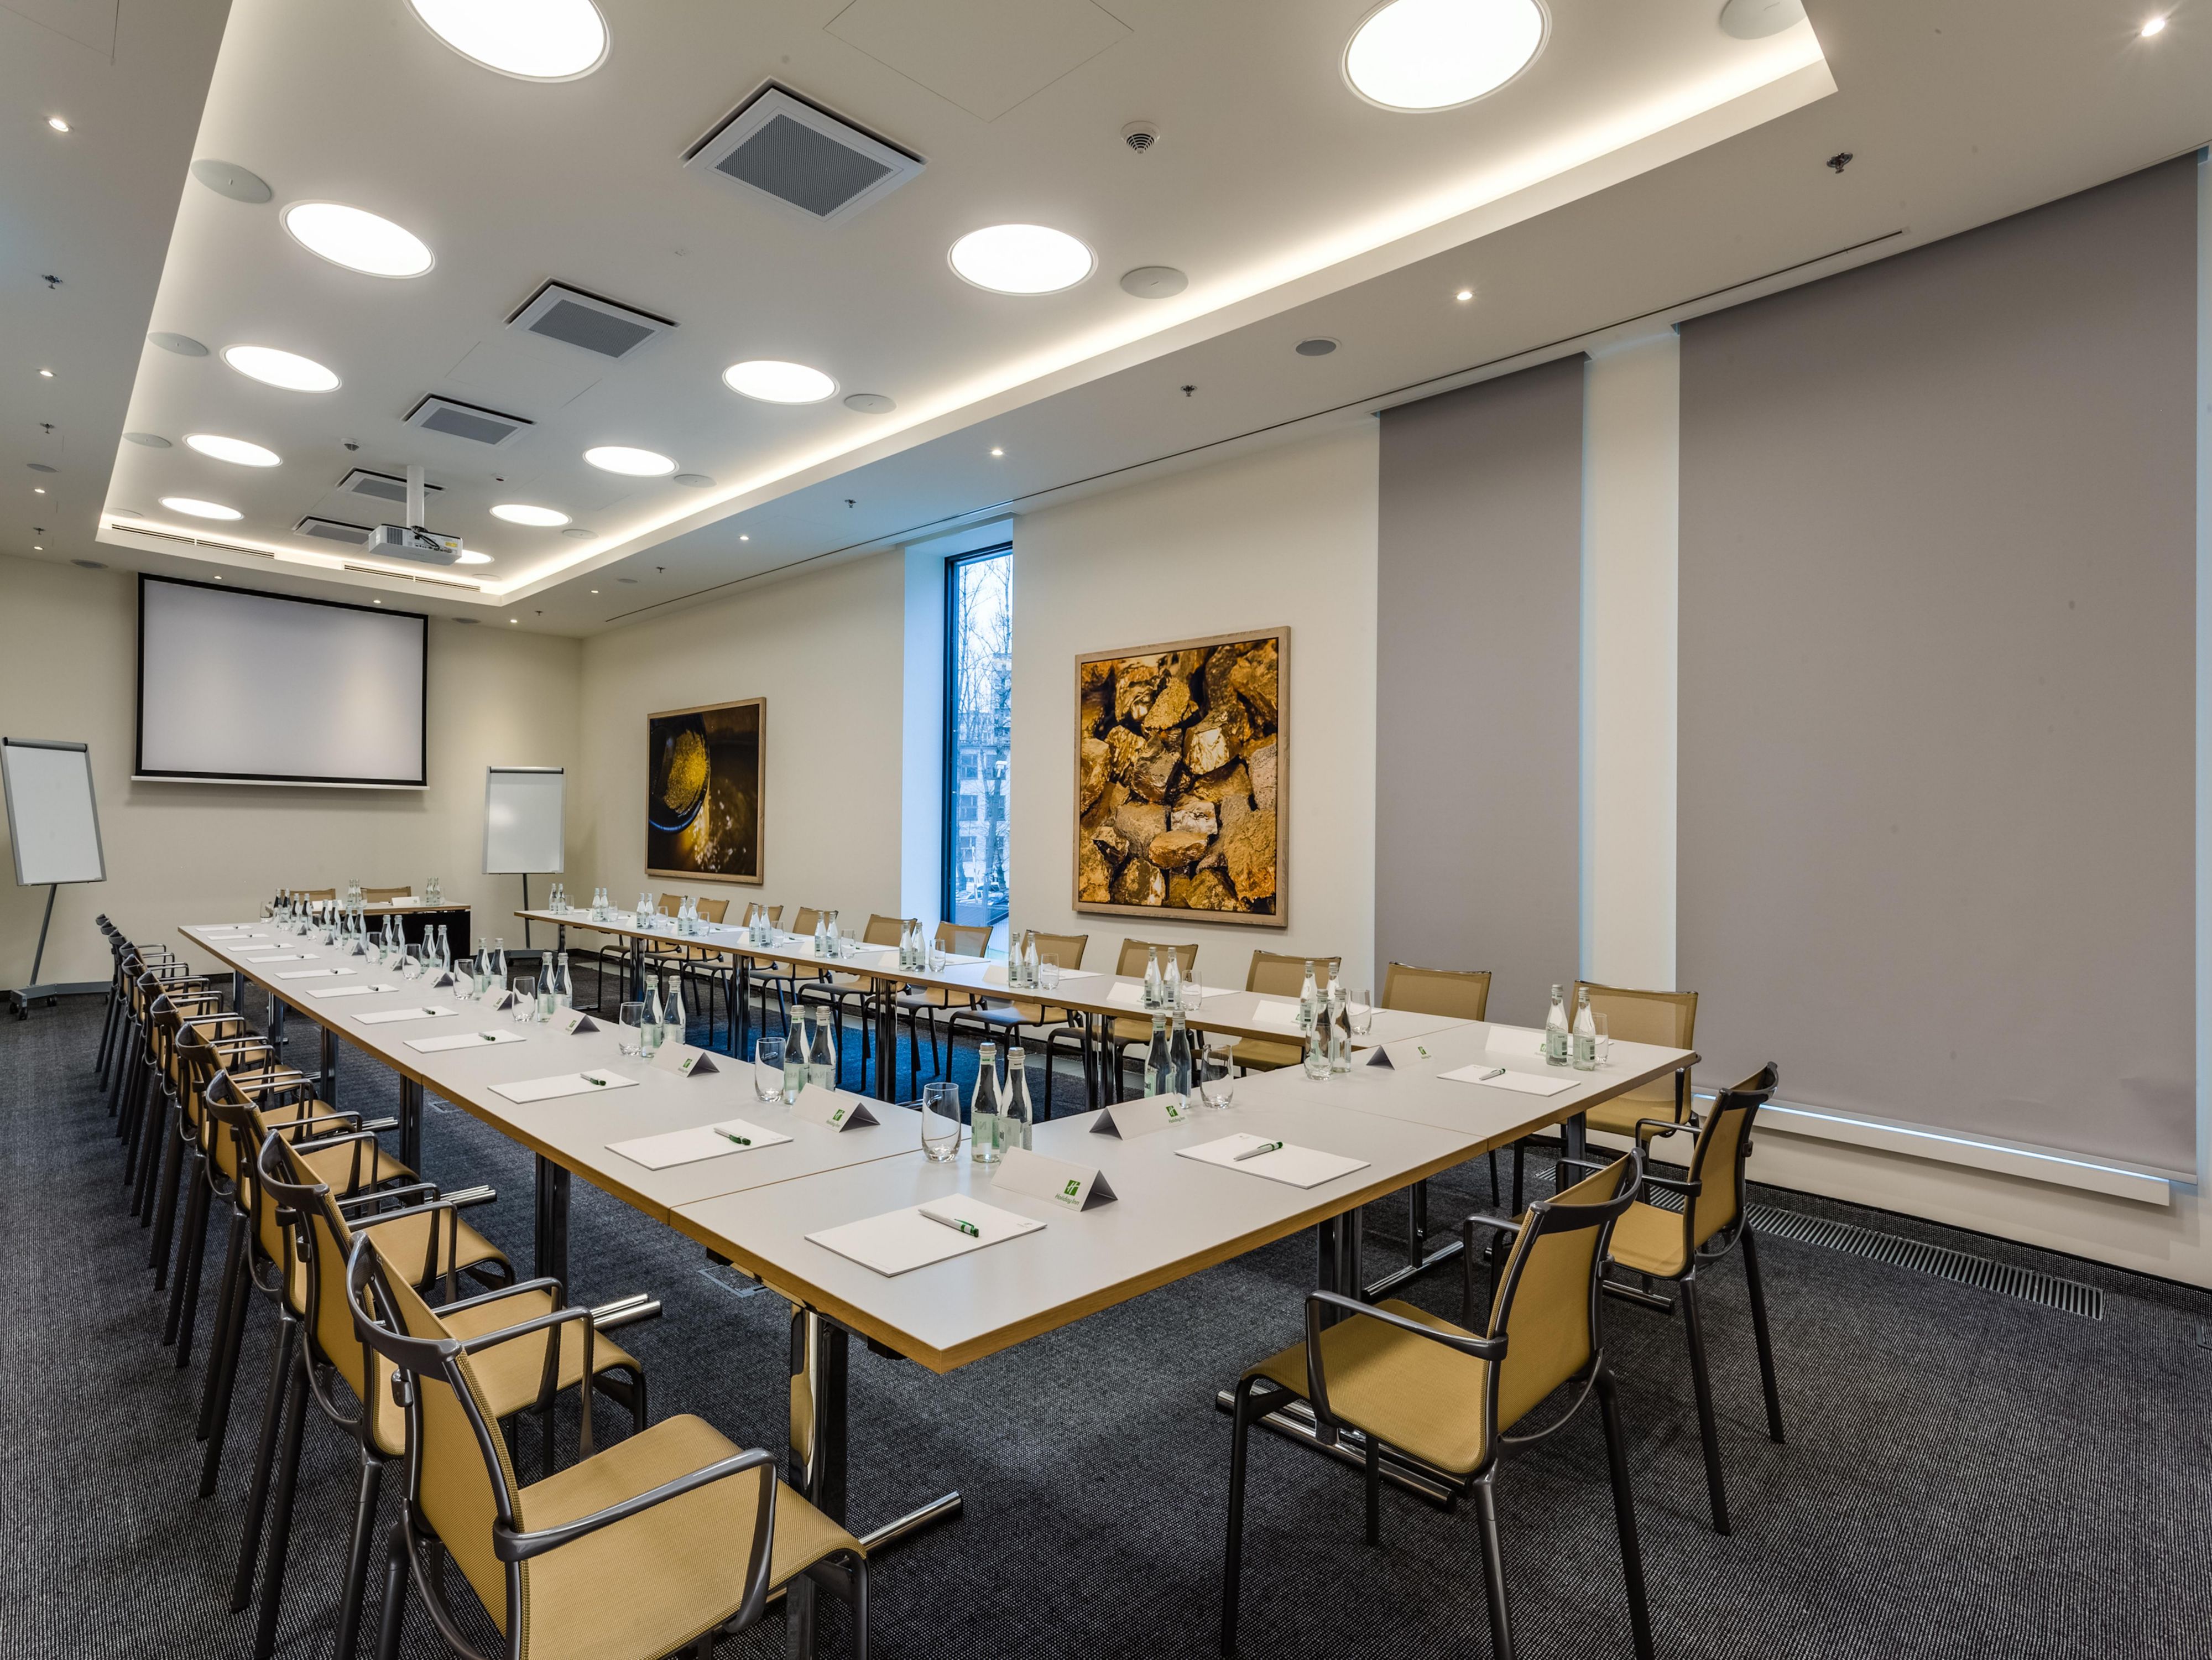 Do you need a modern, well-equipped meeting room? We offer four meeting rooms, with access to daylight, projector and the assistance of our Meeting Ambassador to make sure your meeting will be a success.
Simple, Modern, Adjustable, Reliable and Trustworthy.  - SMART Meetings at Holiday Inn Warsaw City Centre. 